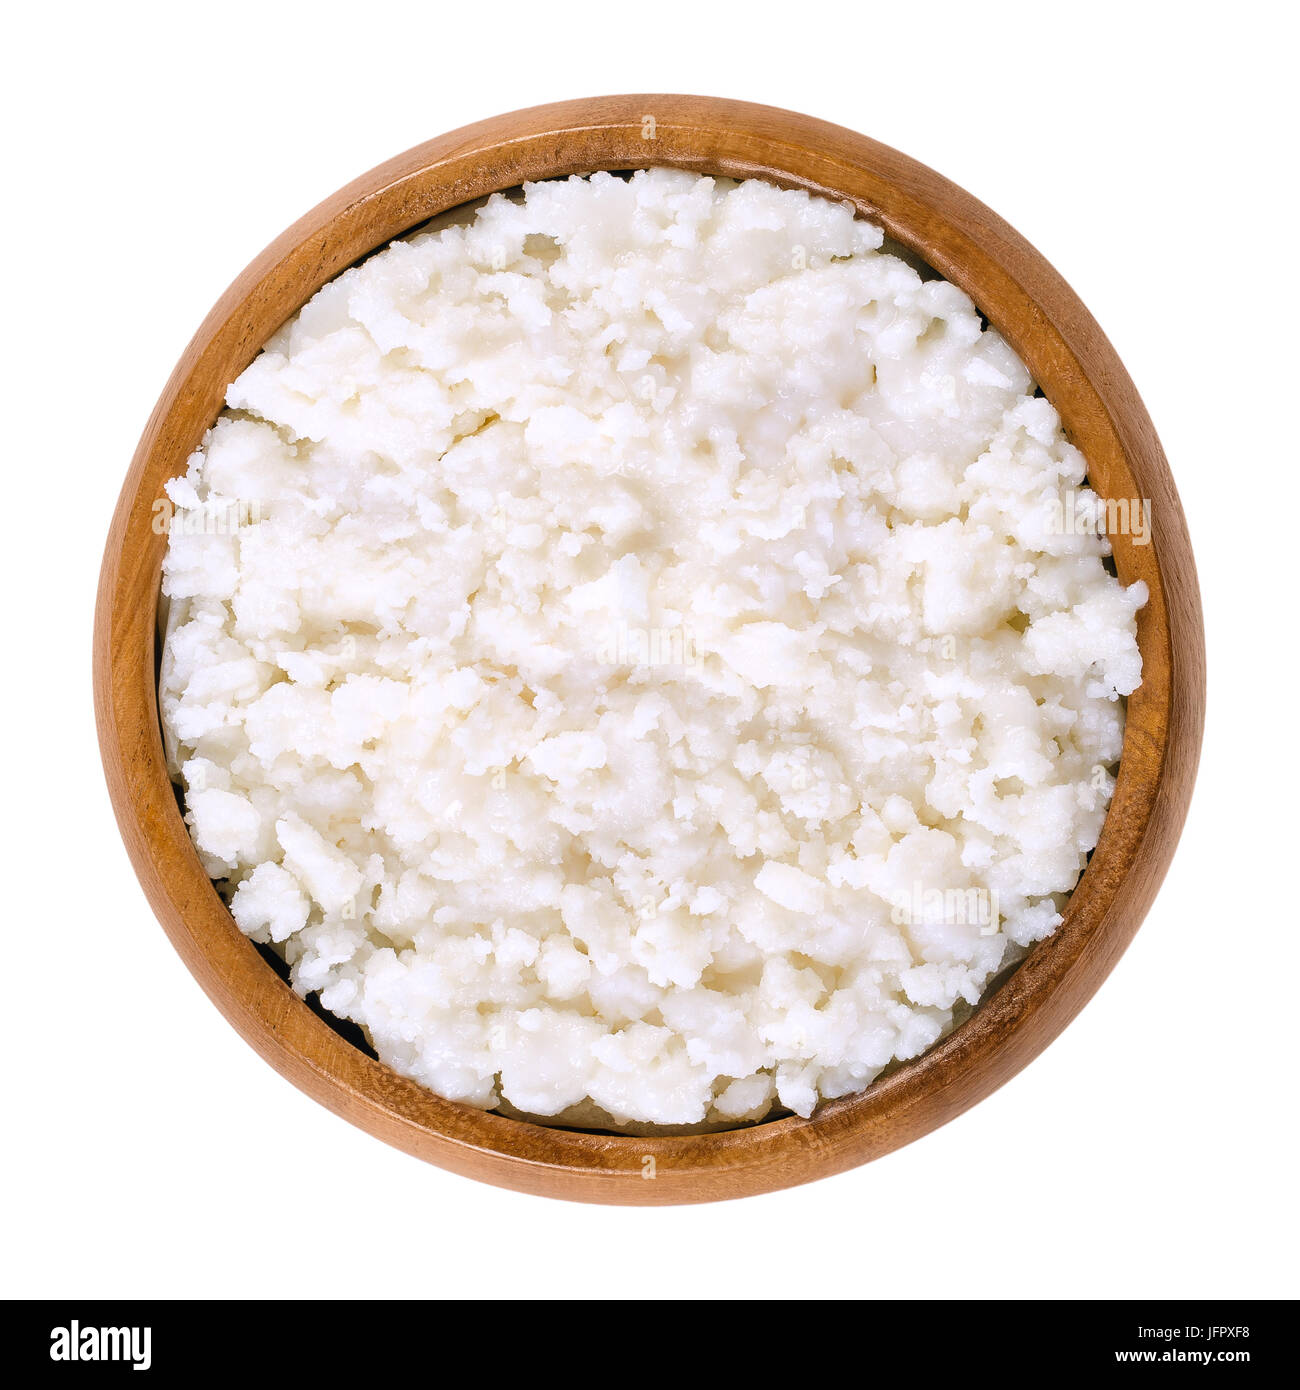 Coconut puree in wooden bowl. Grated flesh and meat of coconut kernels. White, edible and raw food paste and cream. Isolated macro food photo close up Stock Photo